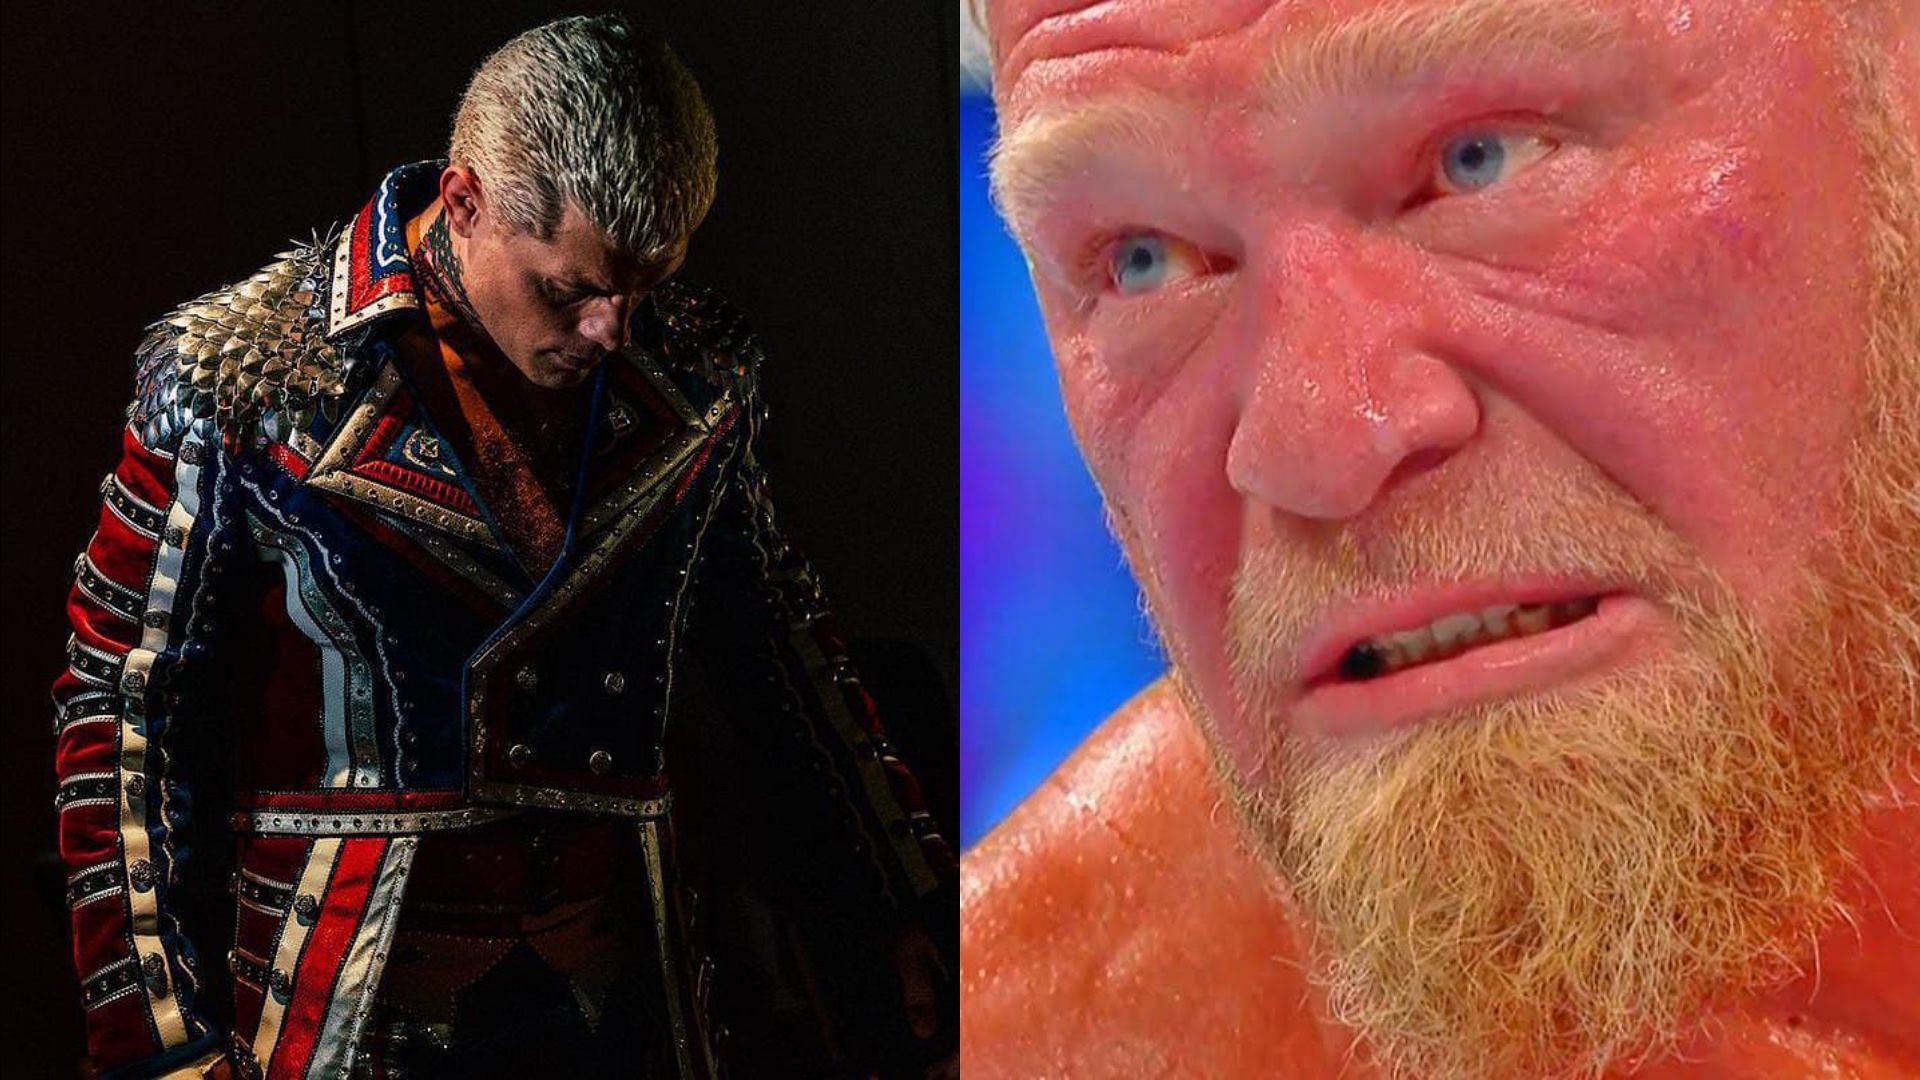 Cody Rhodes and Brock Lesnar will face each other at Summerslam